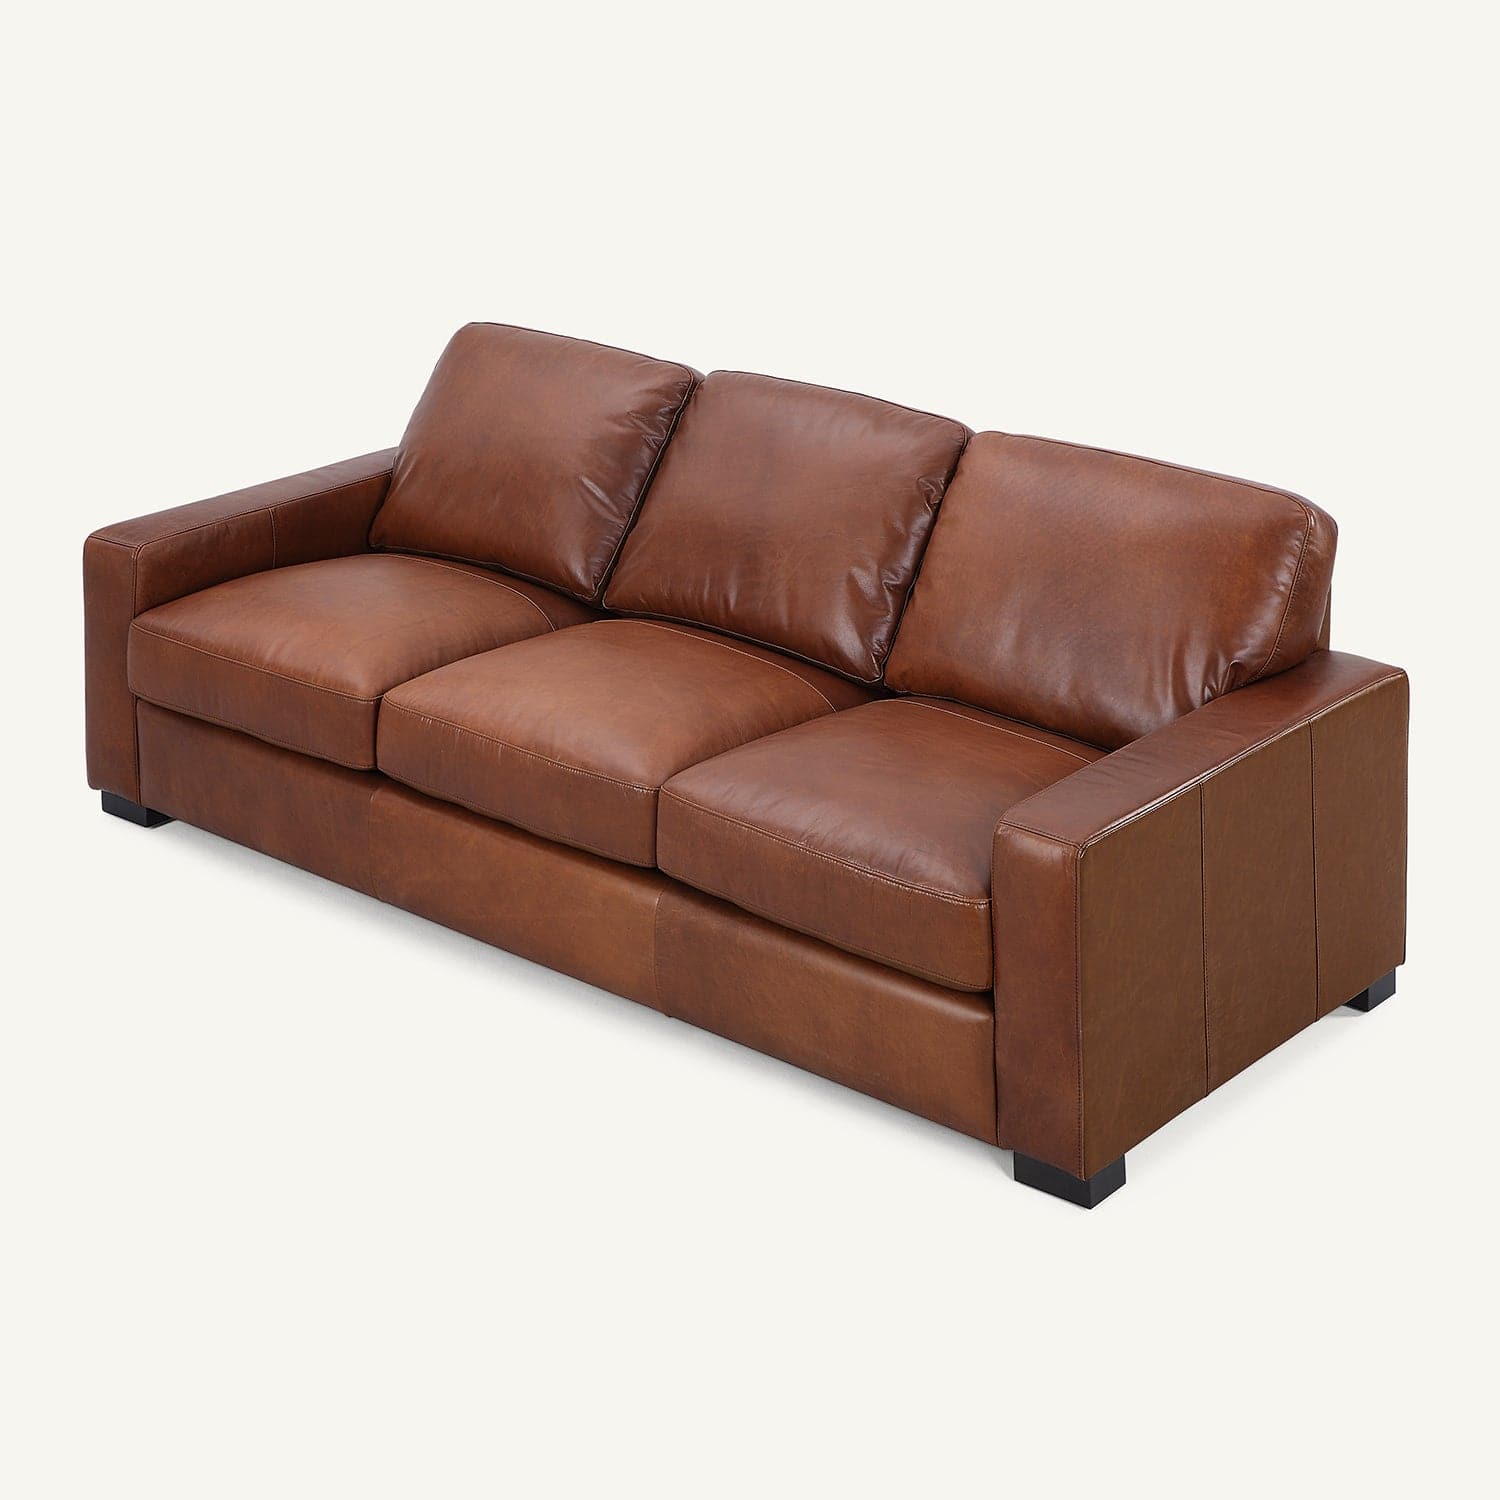 Randall Chestnut Brown Oil Wax Leather 4 Pieces Living Room Sofa Set